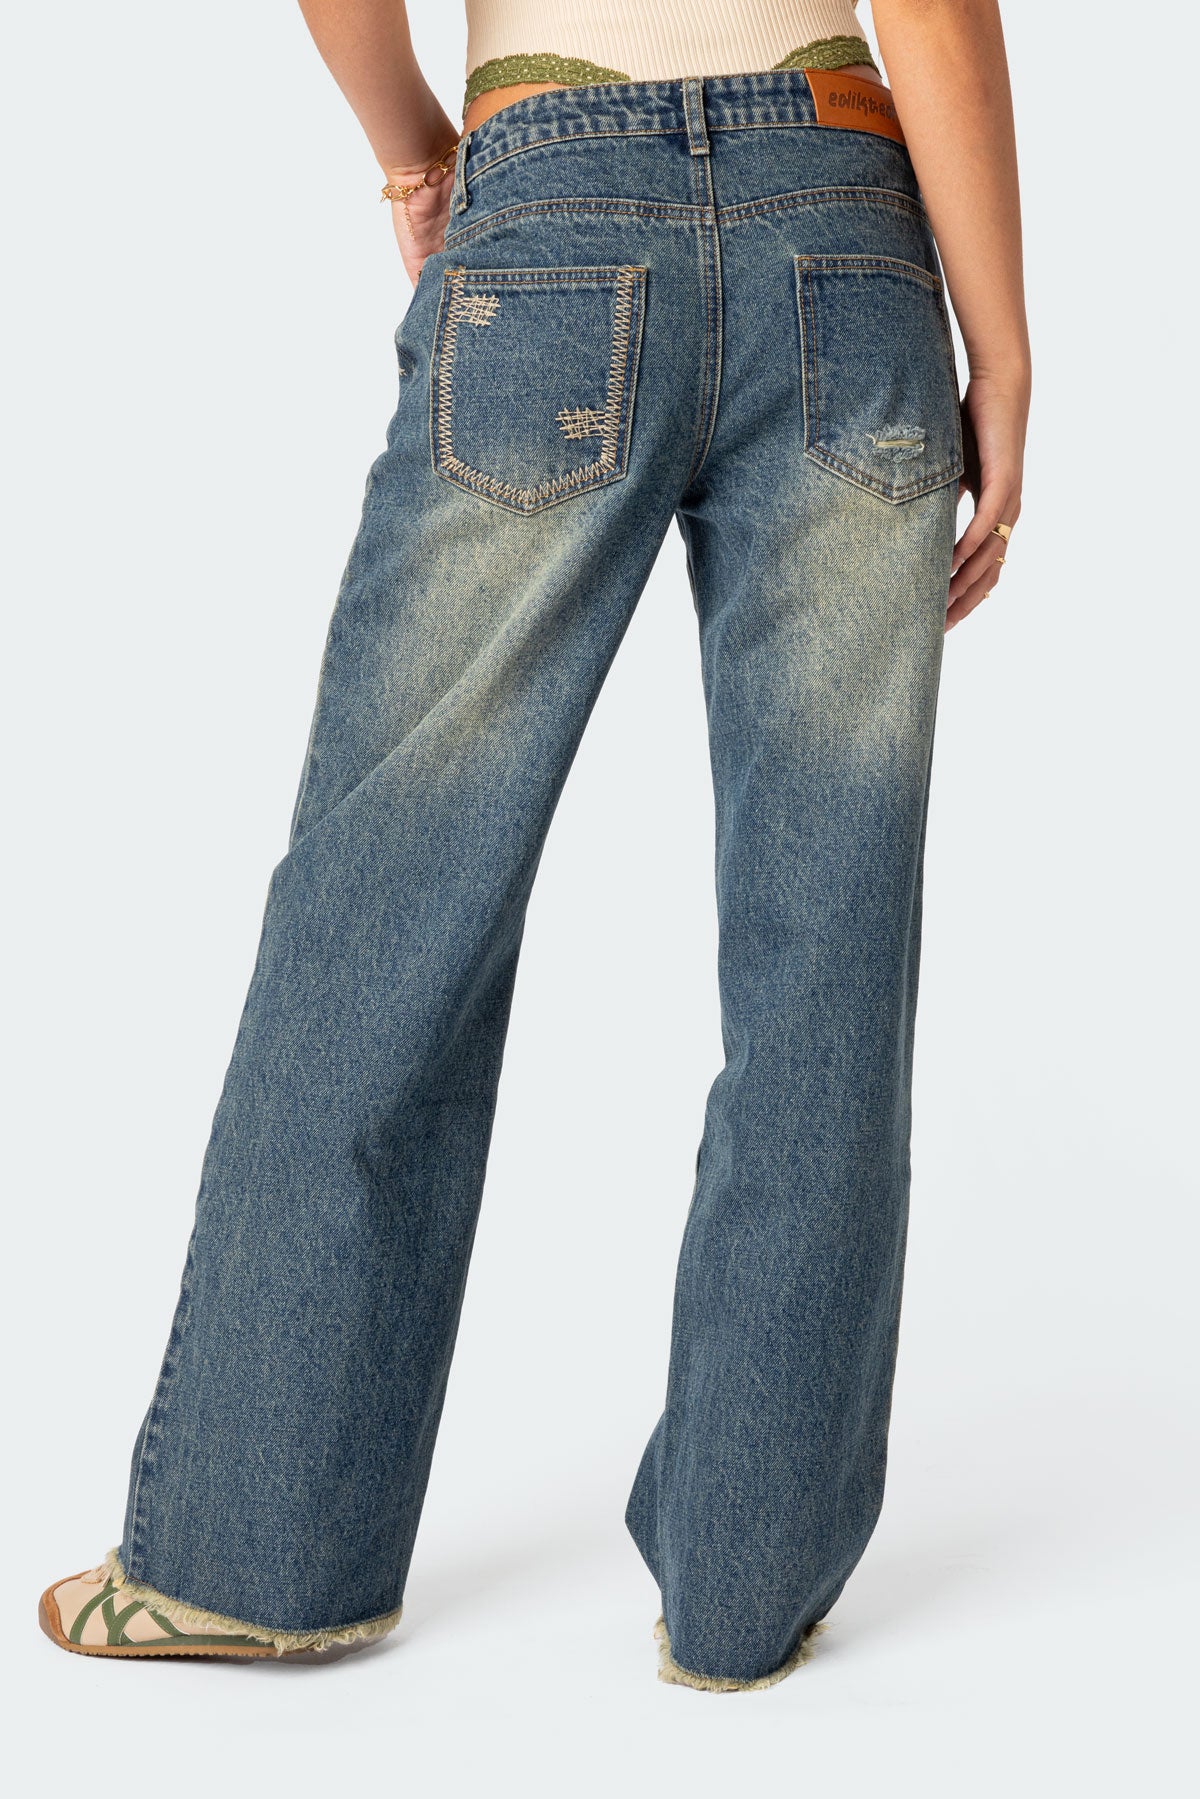 Doll House Low Rise Washed Jeans